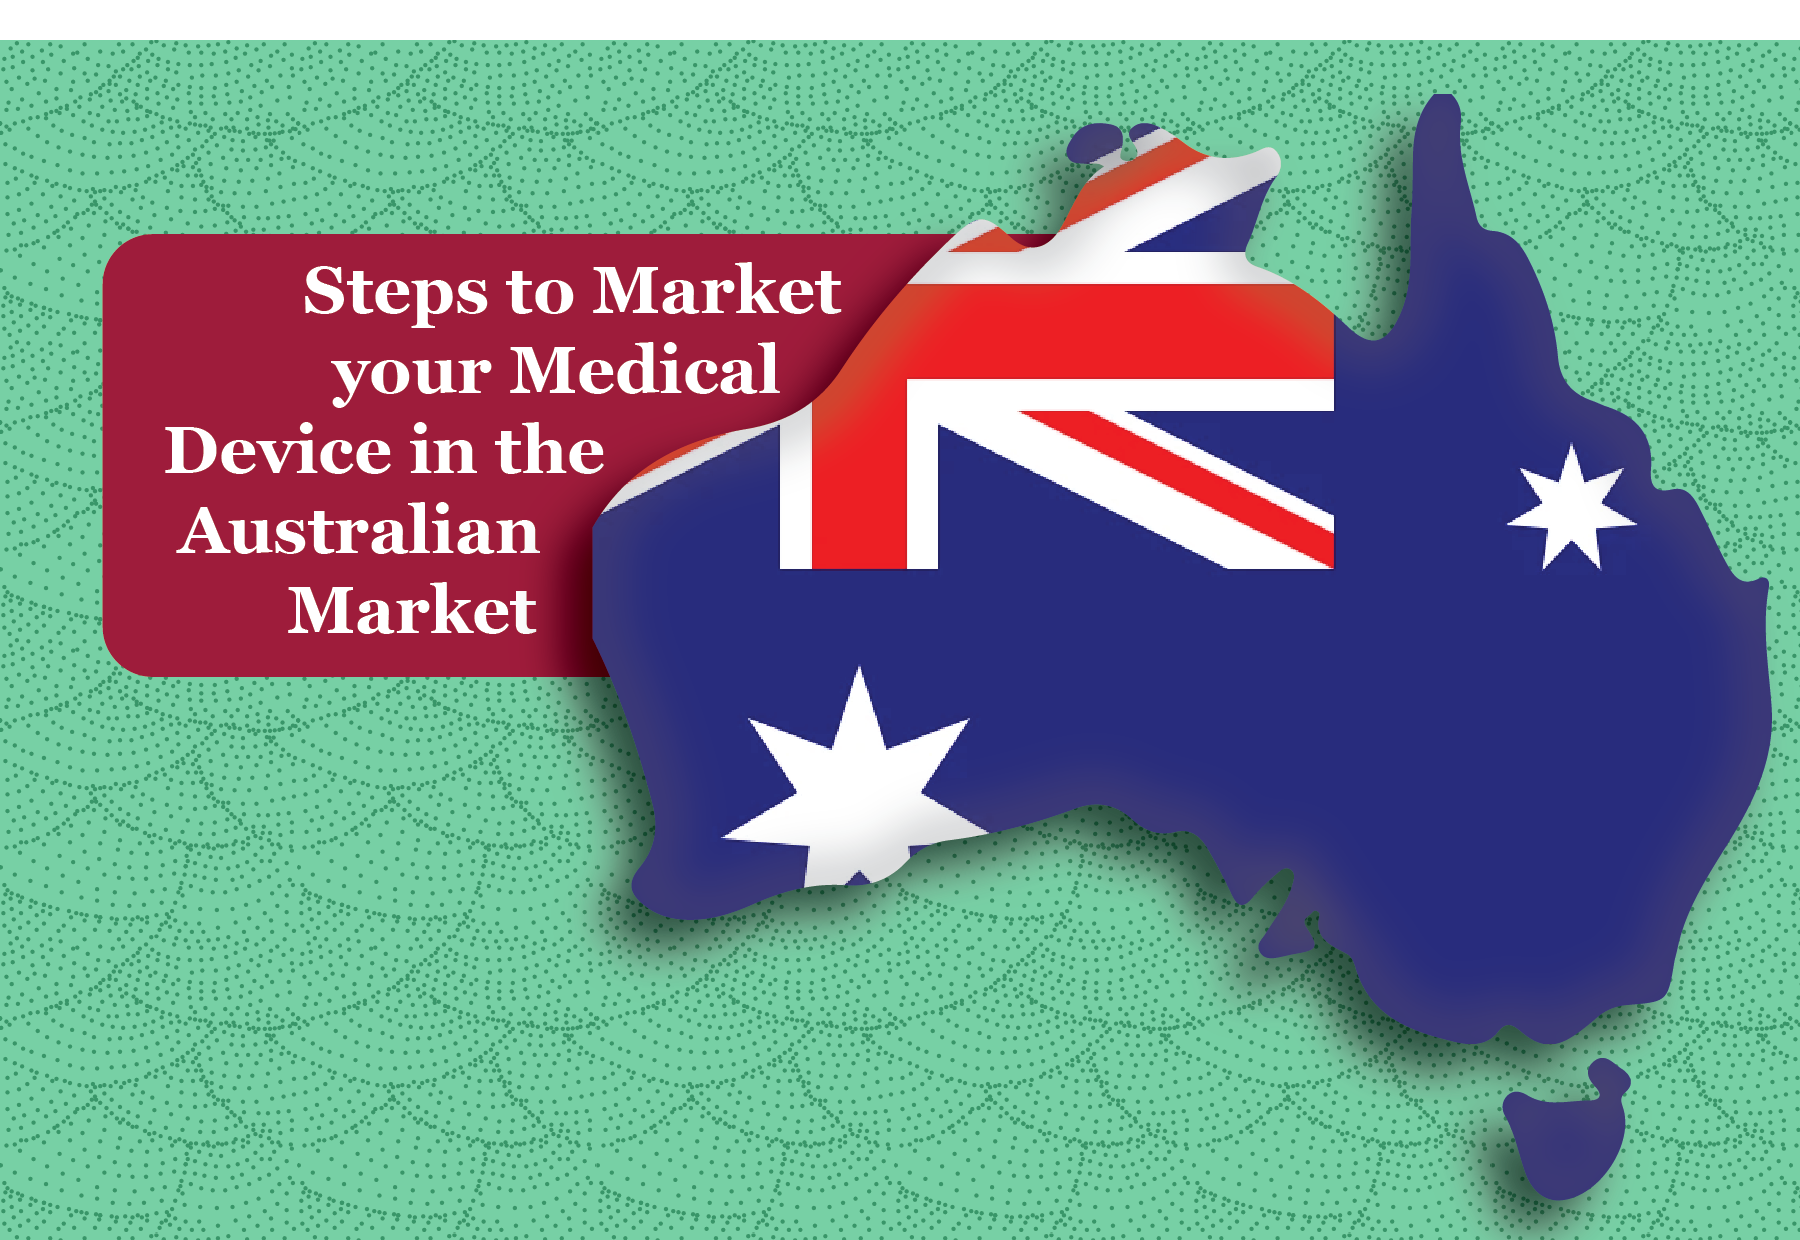 Steps to Market your Medical Device in the Australian Market